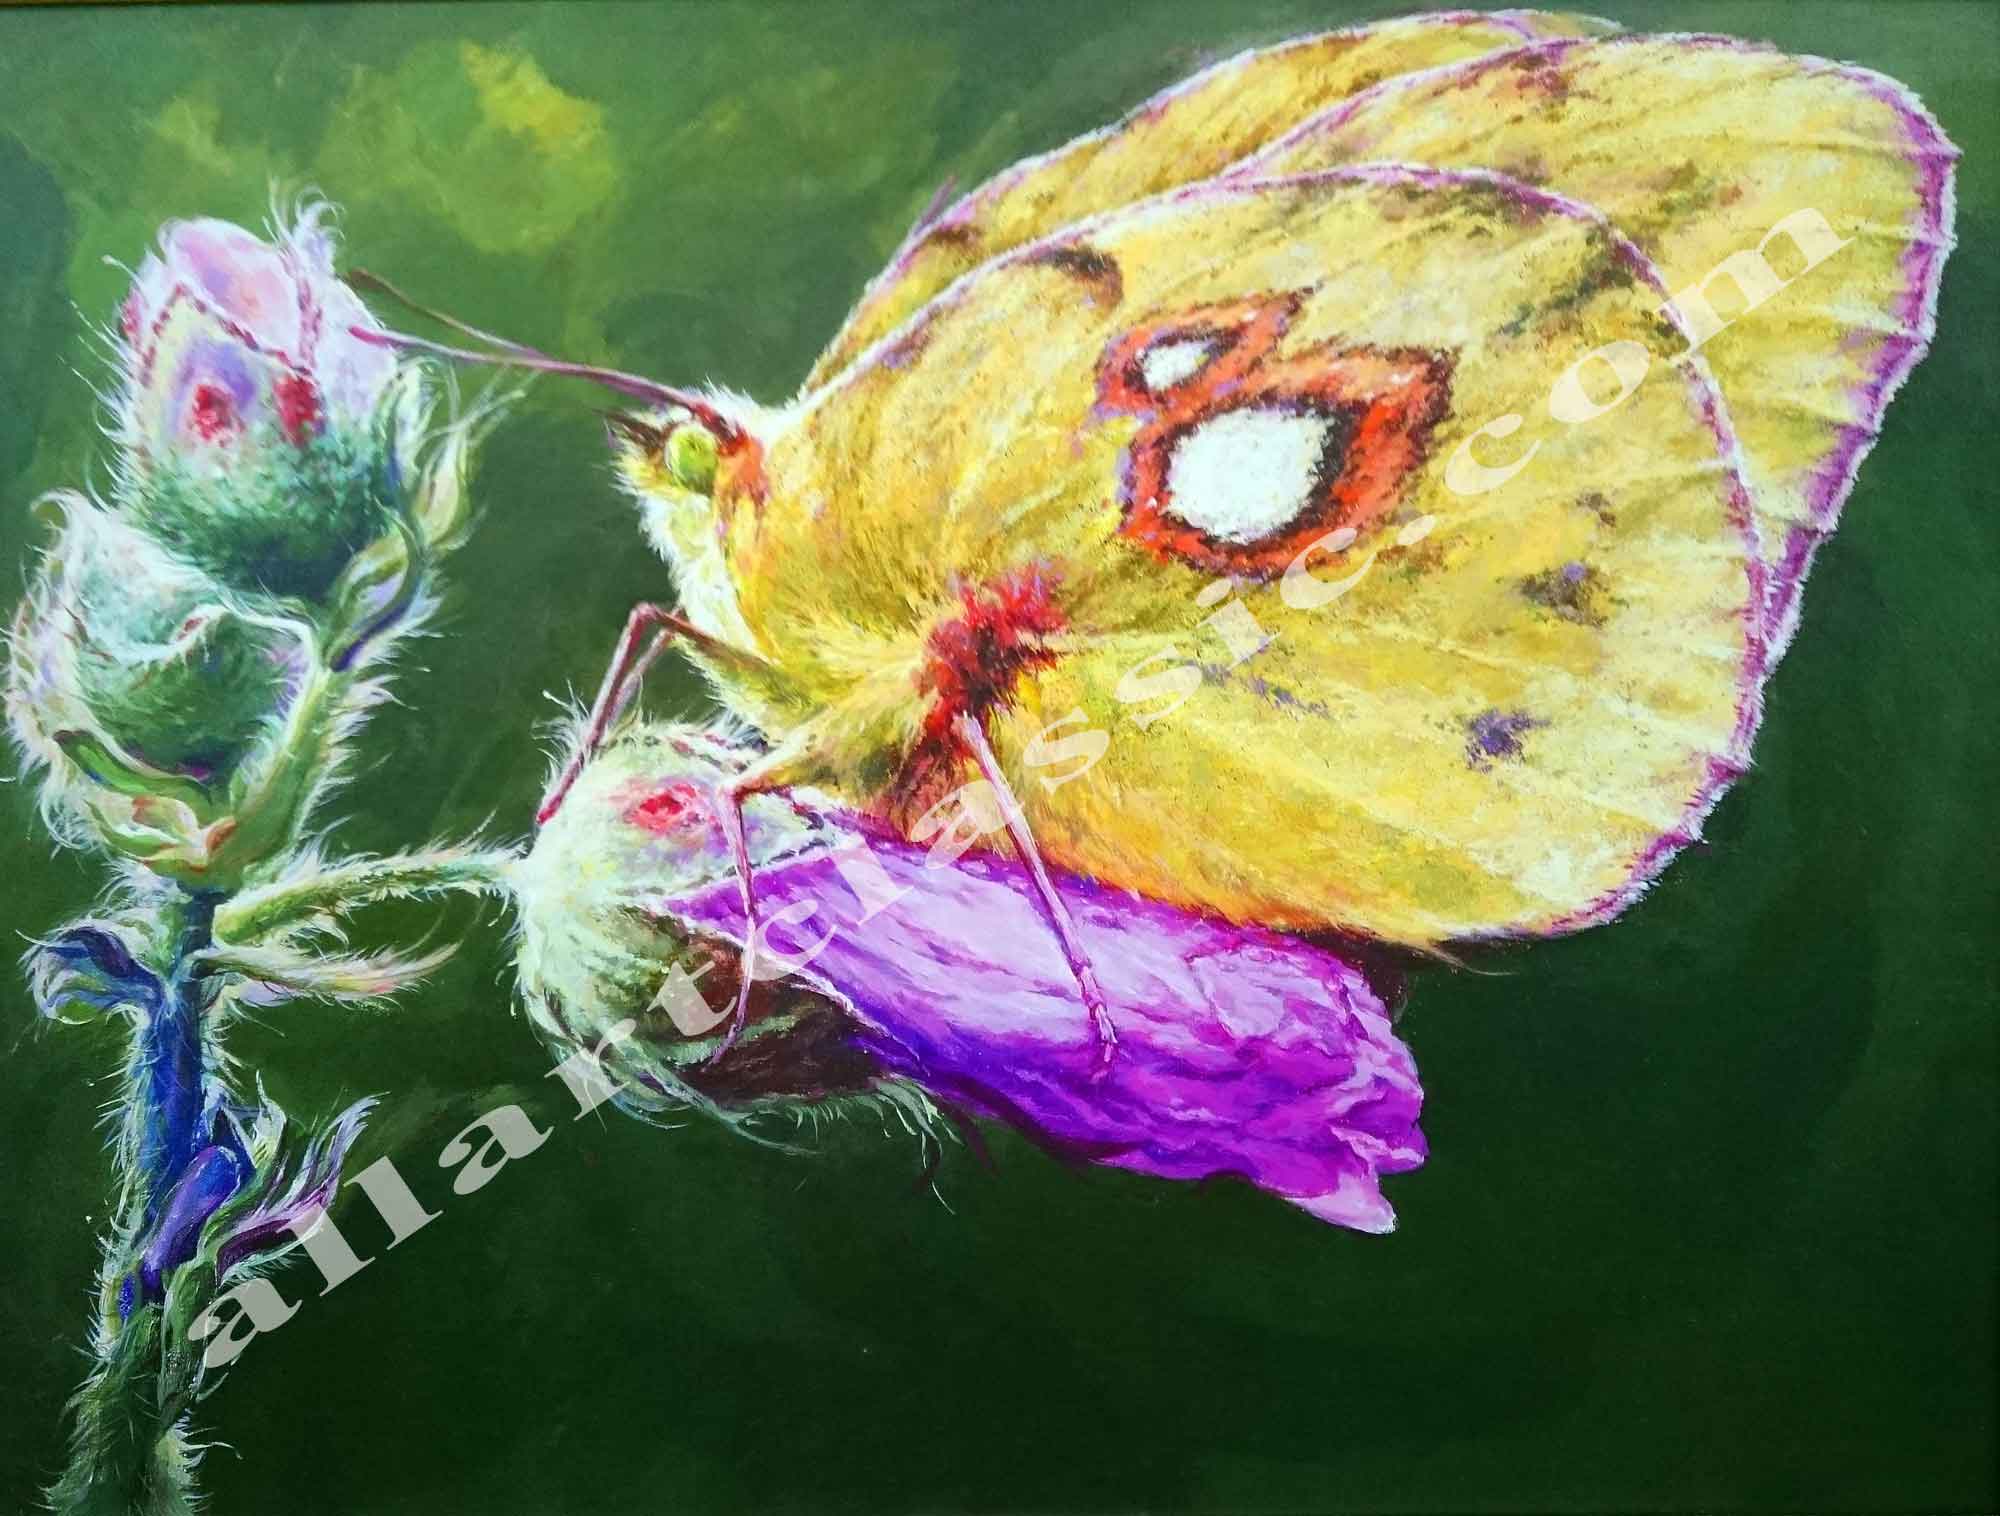 Cheap Paintings for Sale - Original Yellow Butterfly Painting on Canvas